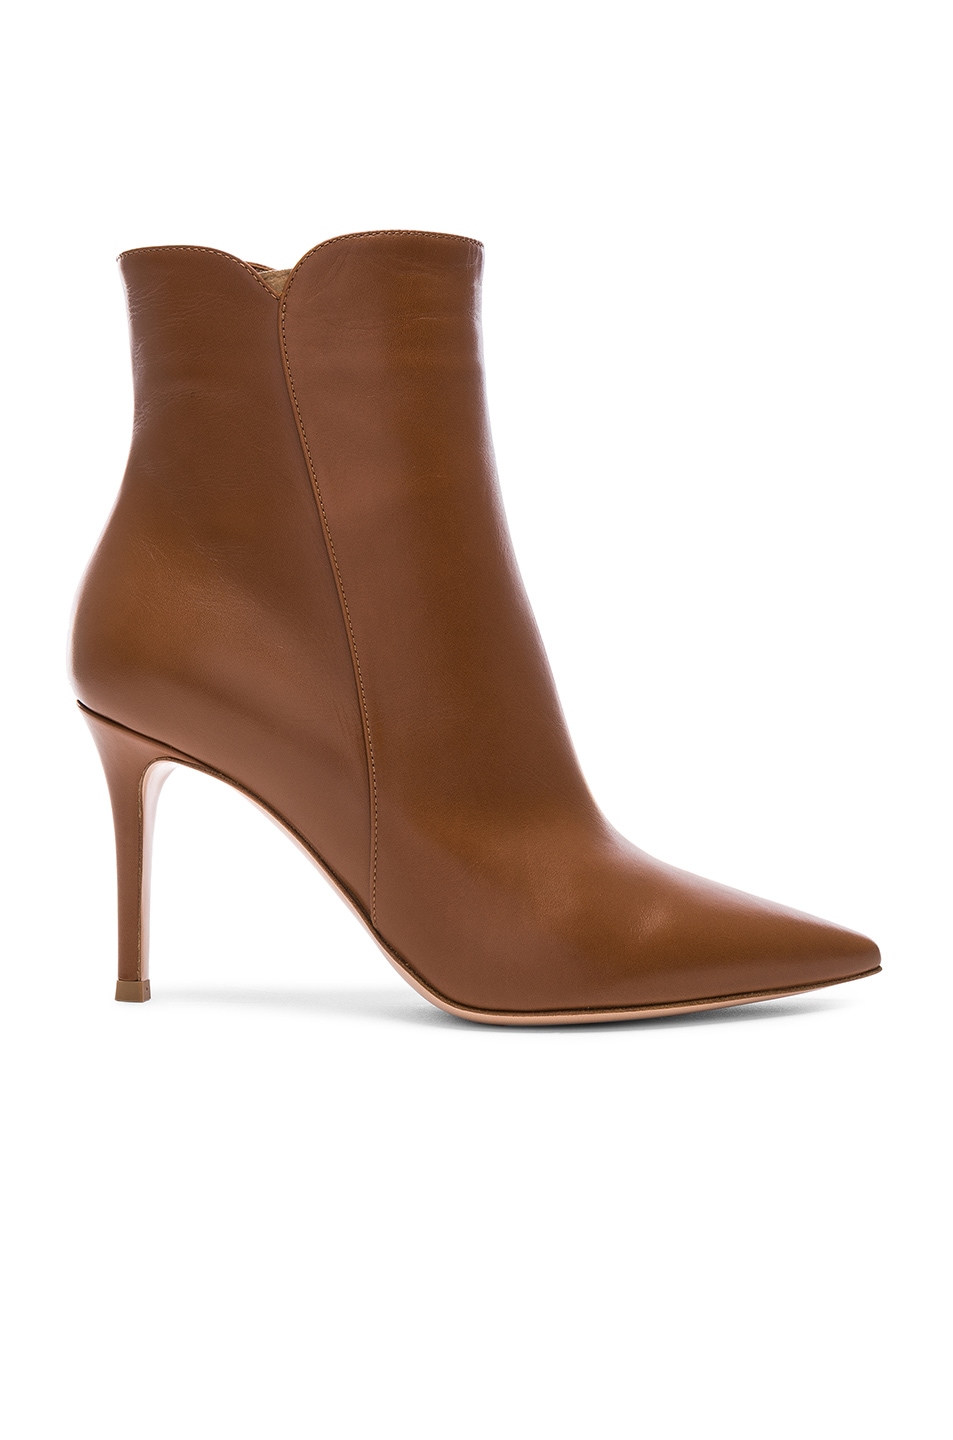 Image 1 of Gianvito Rossi Leather Levy Ankle Boots in Cuoio